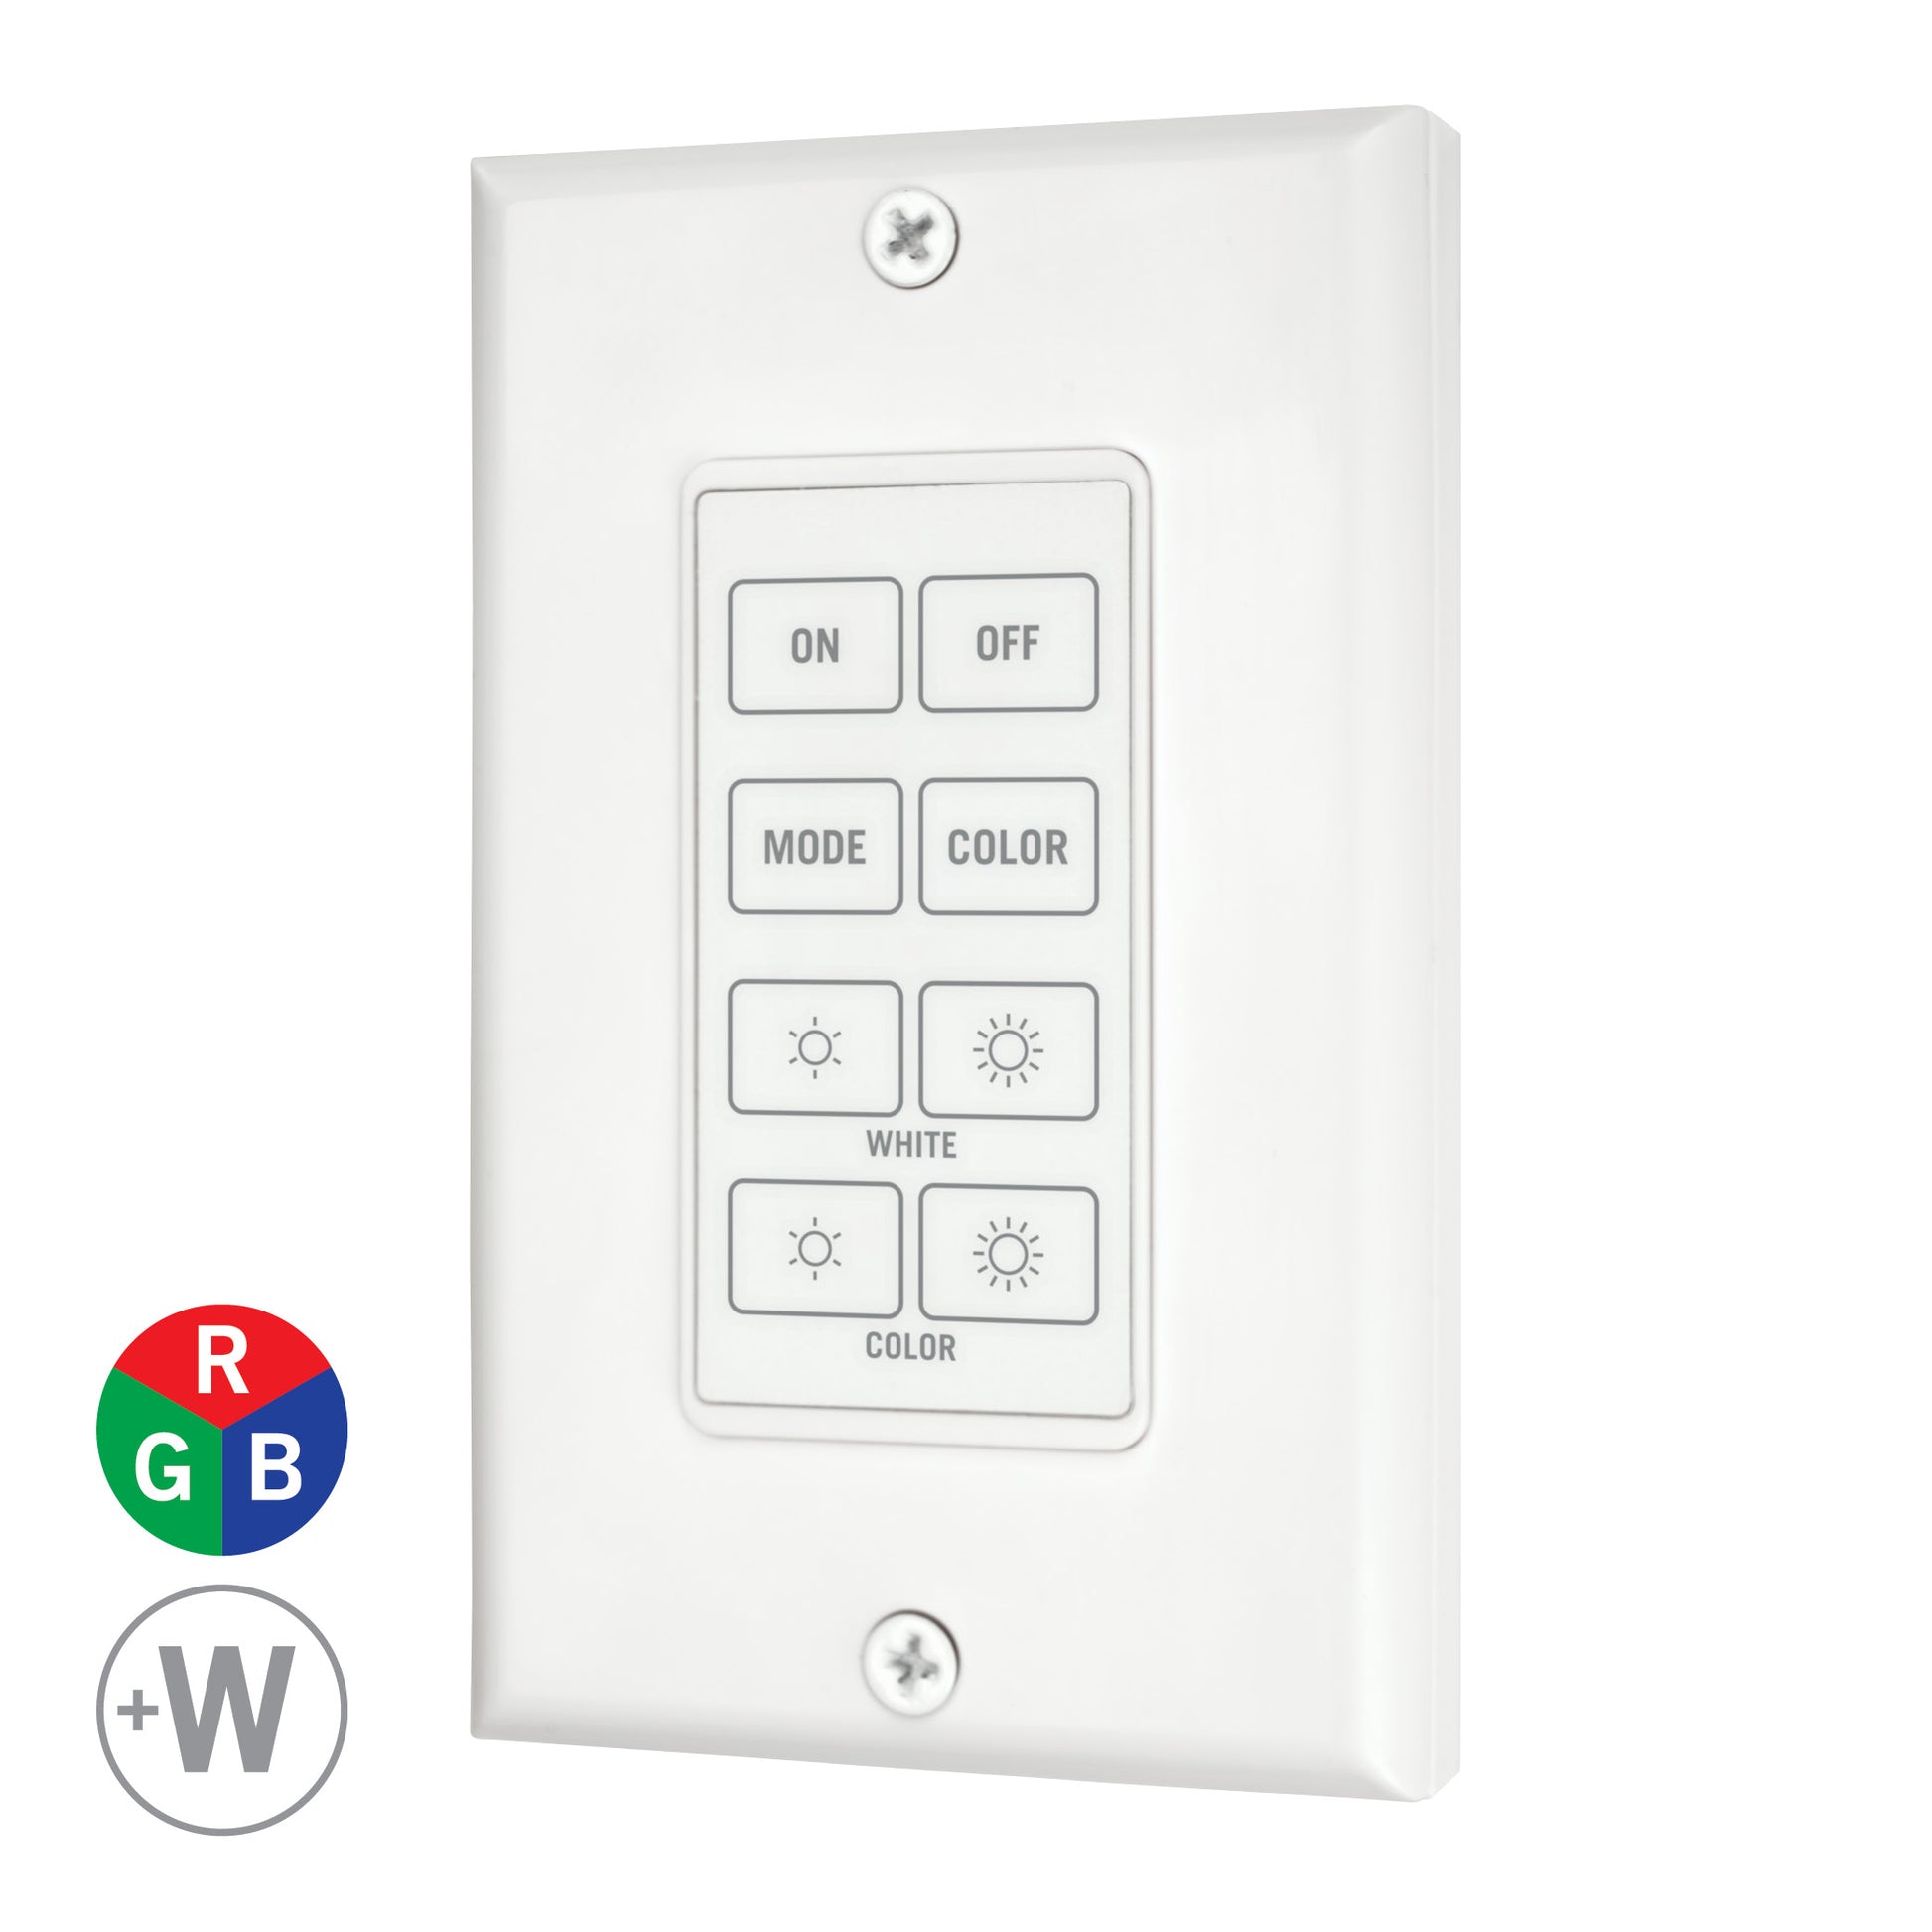 Full Color Wireless Wall Switch